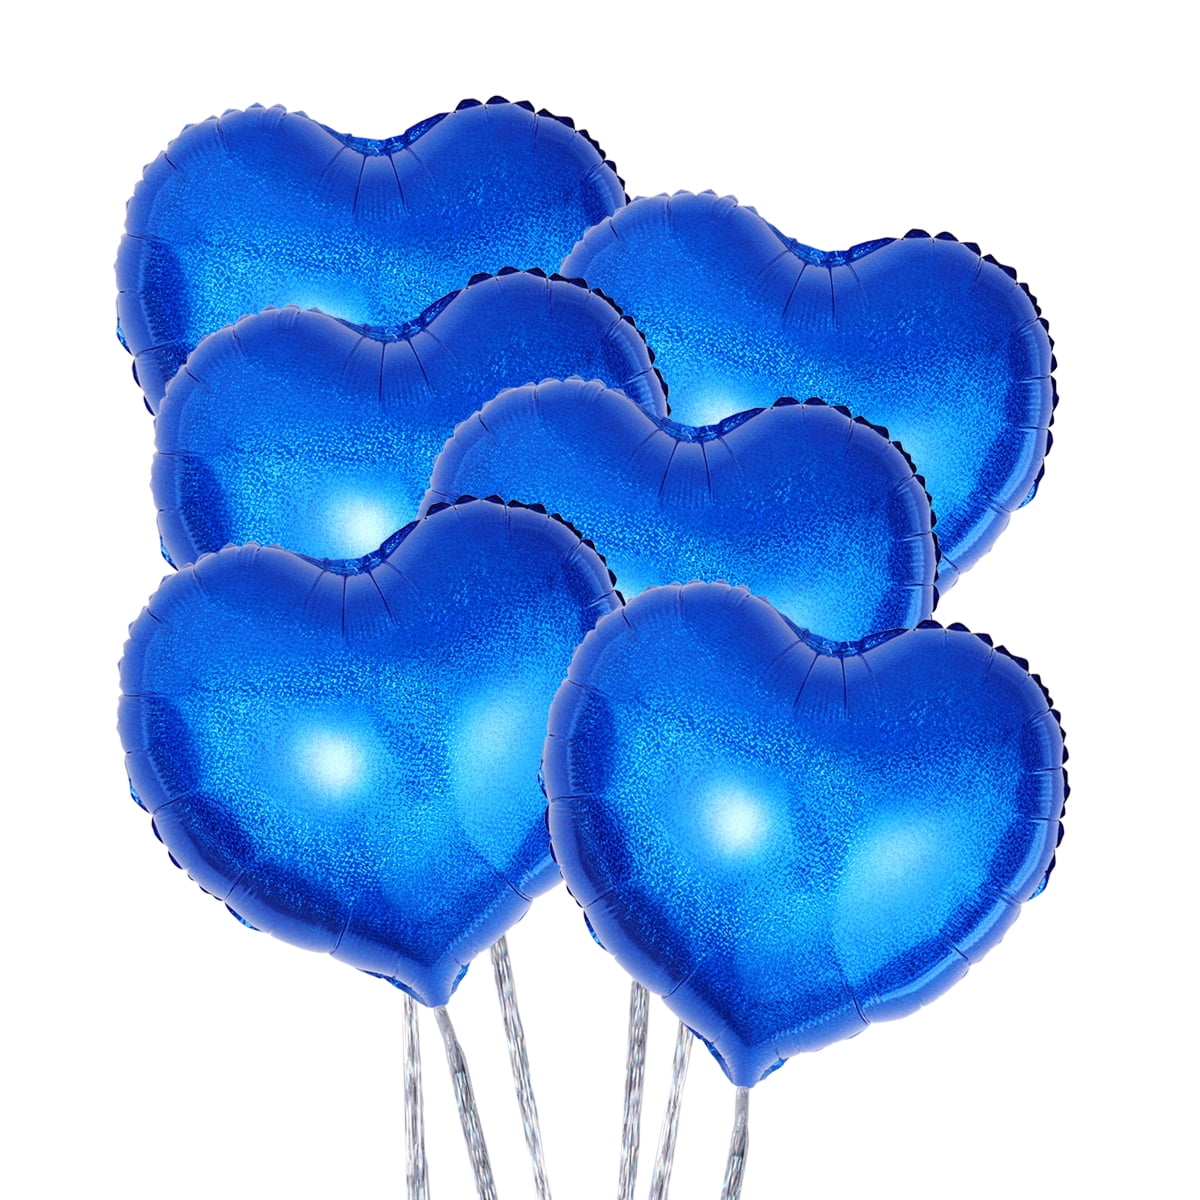 Heart Shaped Foil Balloon Valentines Day Birthday Anniversary Party Decoration Balloons 18Inch Blue Color Pack of 1 